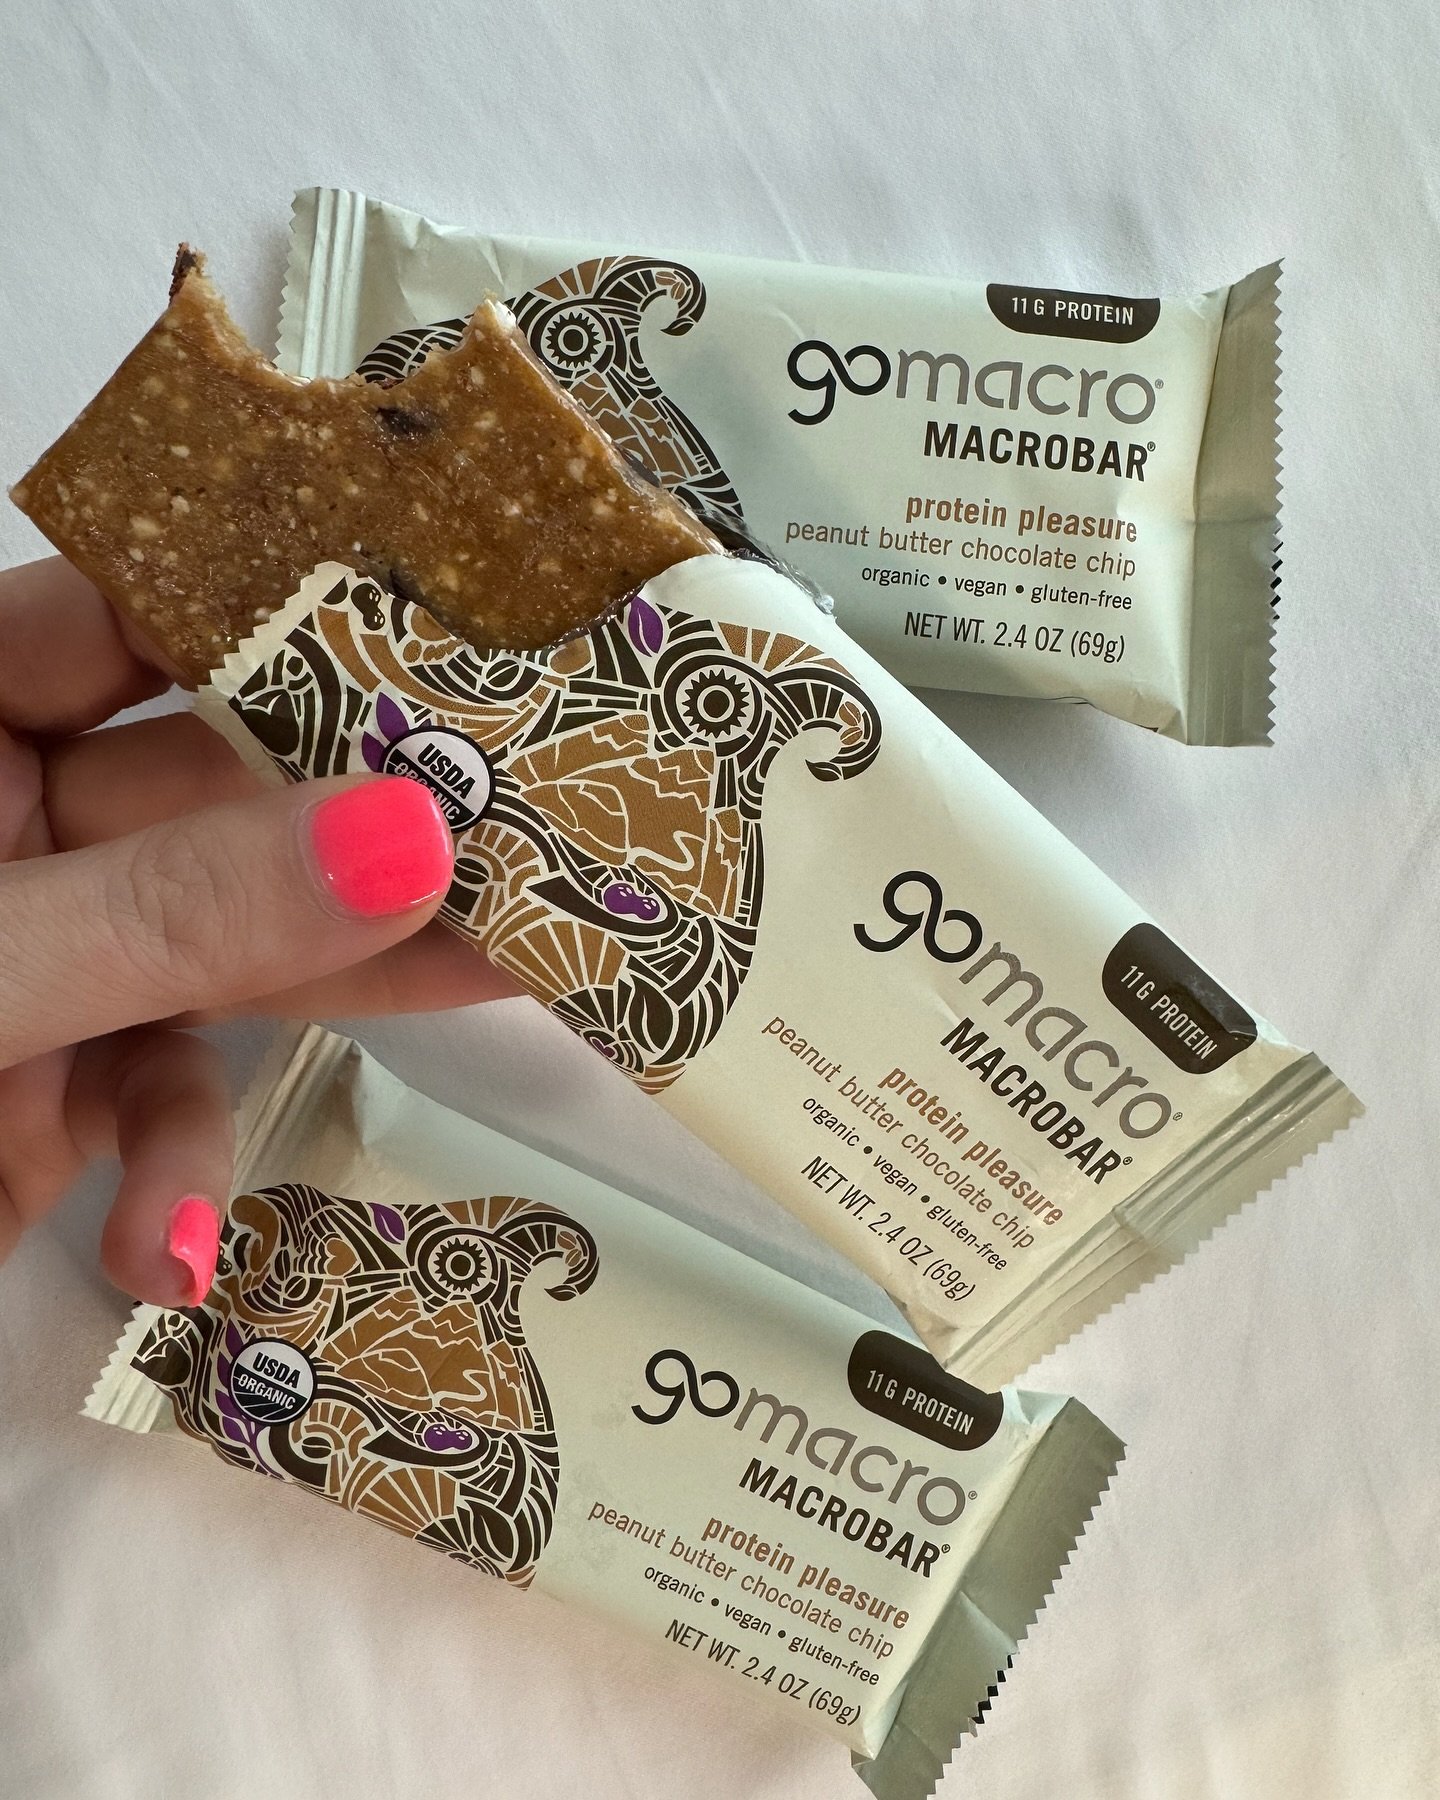 Finding a bar that doesn&rsquo;t have crap ingredients, digests well, leaves me satisfied but not too full, and has great flavor are VERY tough to find 🙄I stumbled upon @gomacro bars a few years back at @sprouts and I&rsquo;ve been addicted since 😍